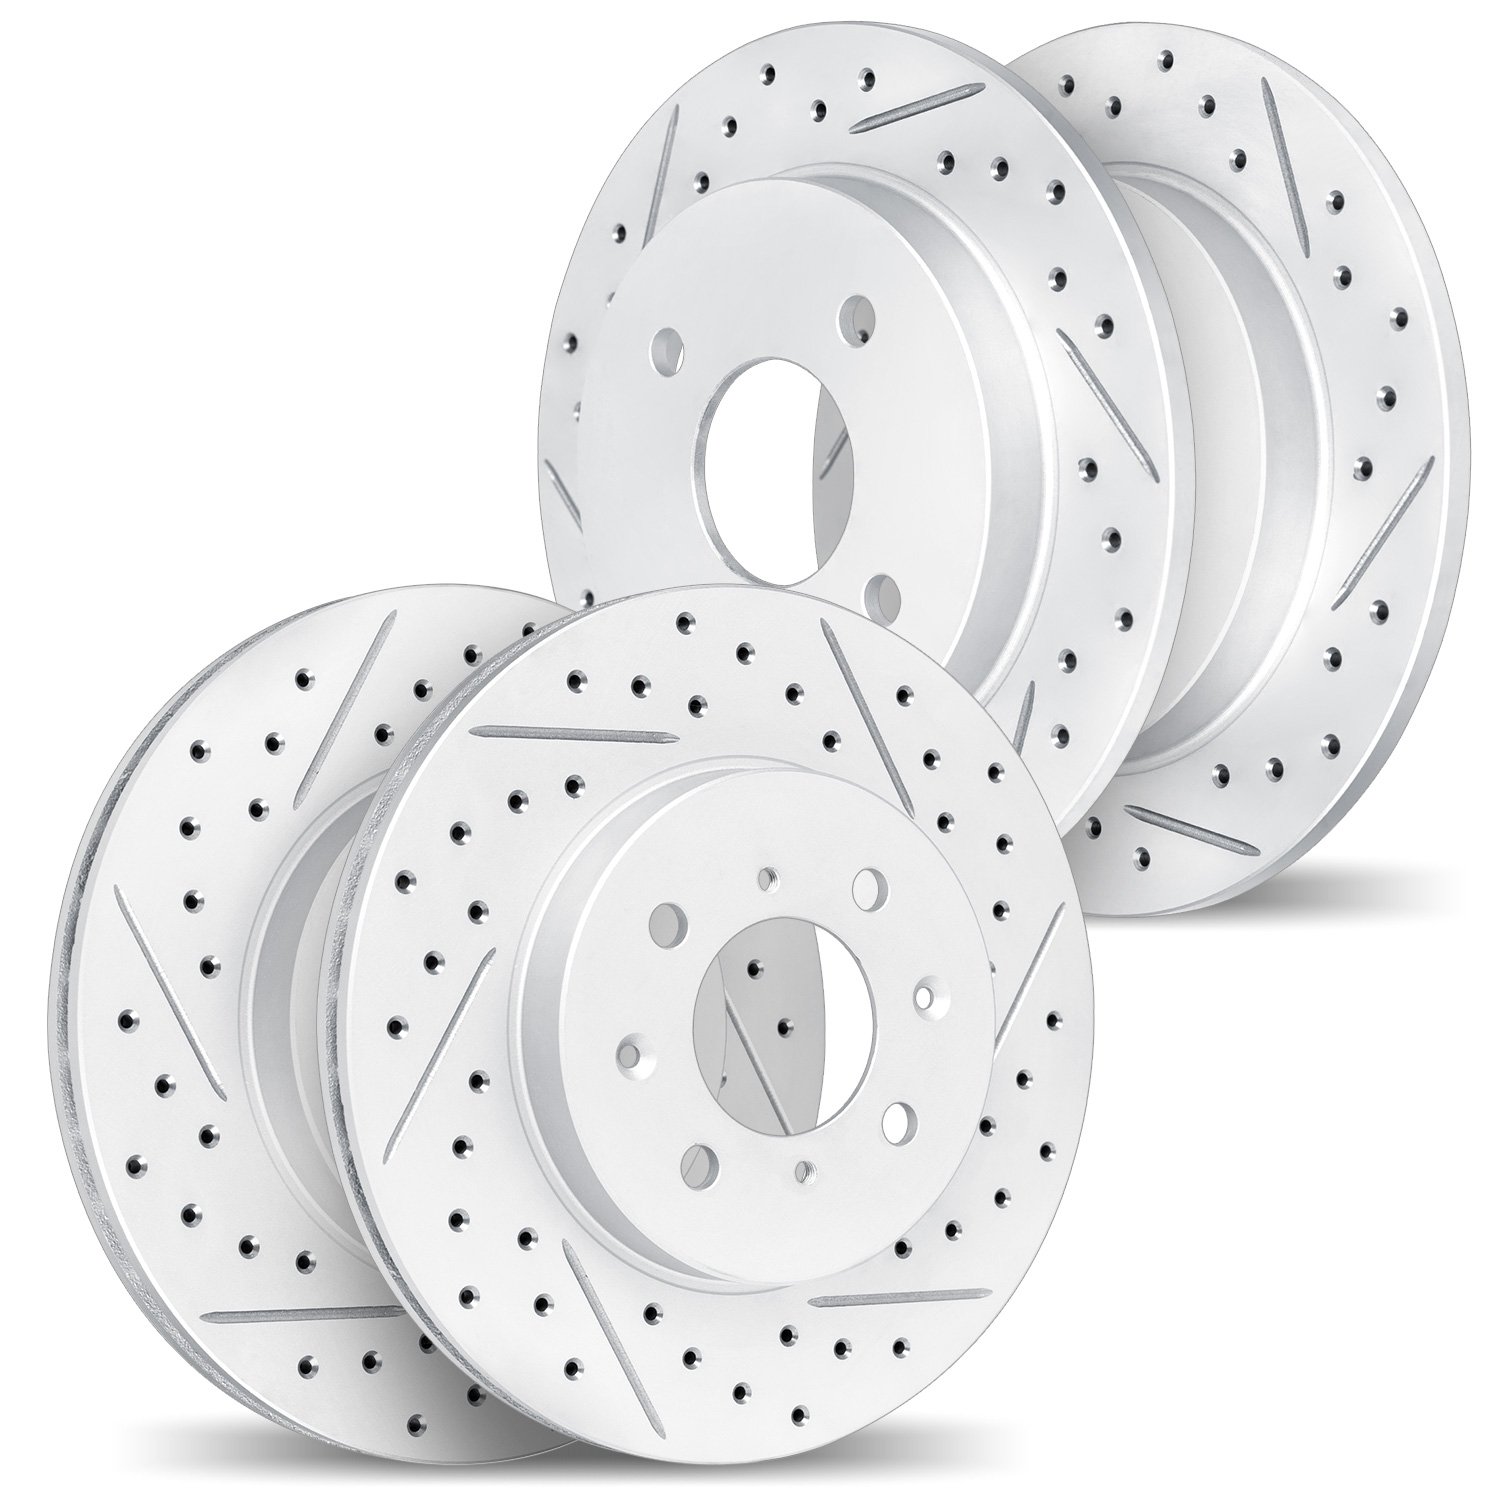 2004-59058 Geoperformance Drilled/Slotted Brake Rotors, 1990-1991 Acura/Honda, Position: Front and Rear